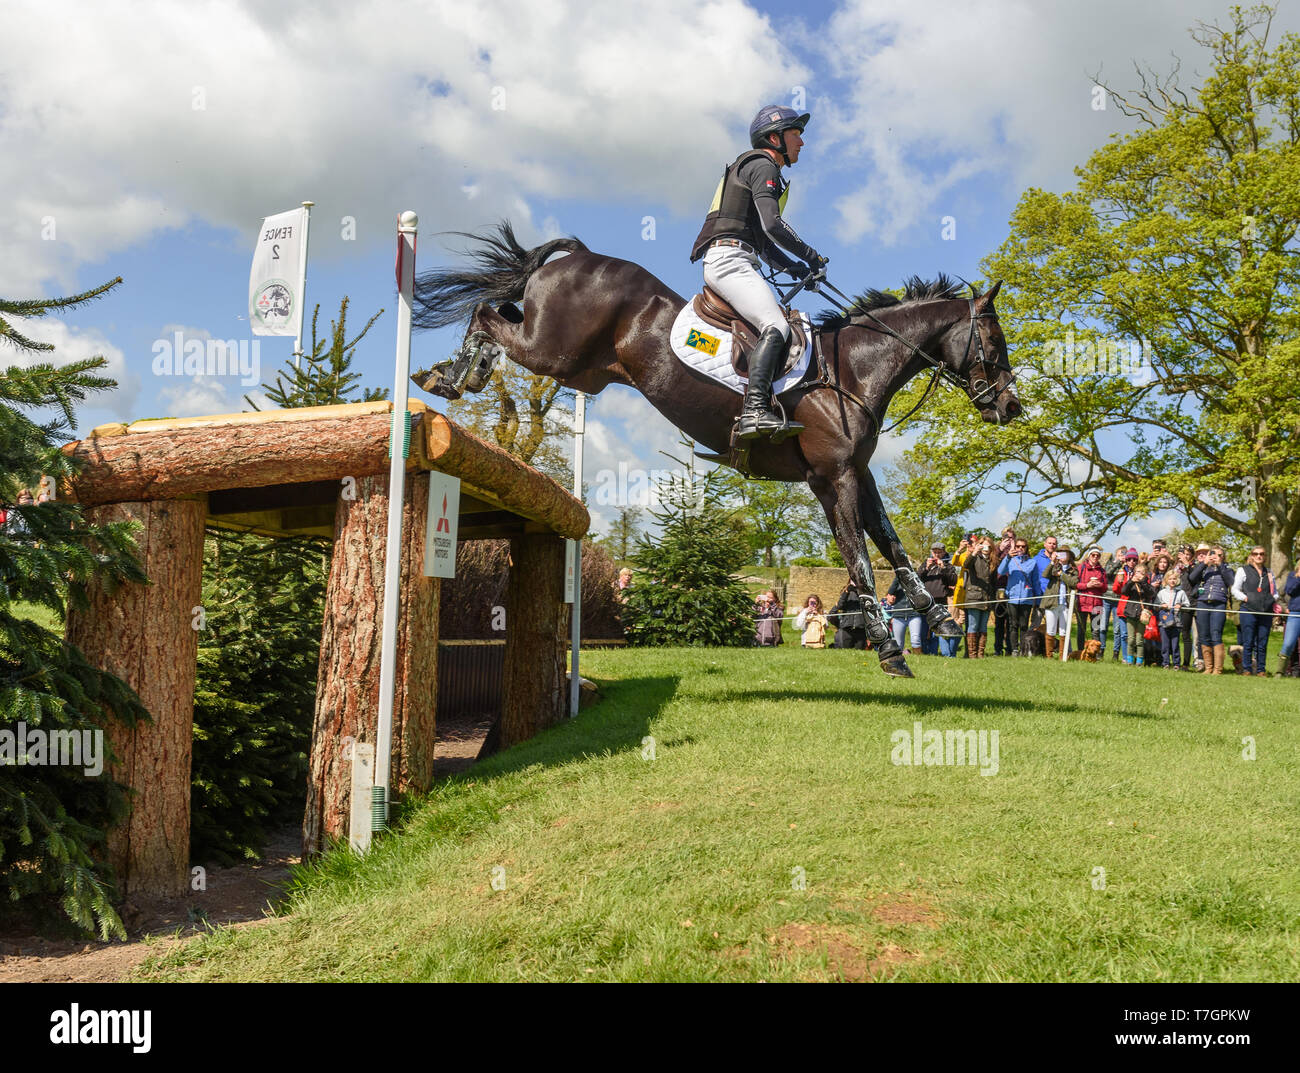 Oliver Townend and CILLNABRADDEN EVO during the cross country phase of the Mitsubishi Motors Badminton Horse Trials, May 2019 Stock Photo